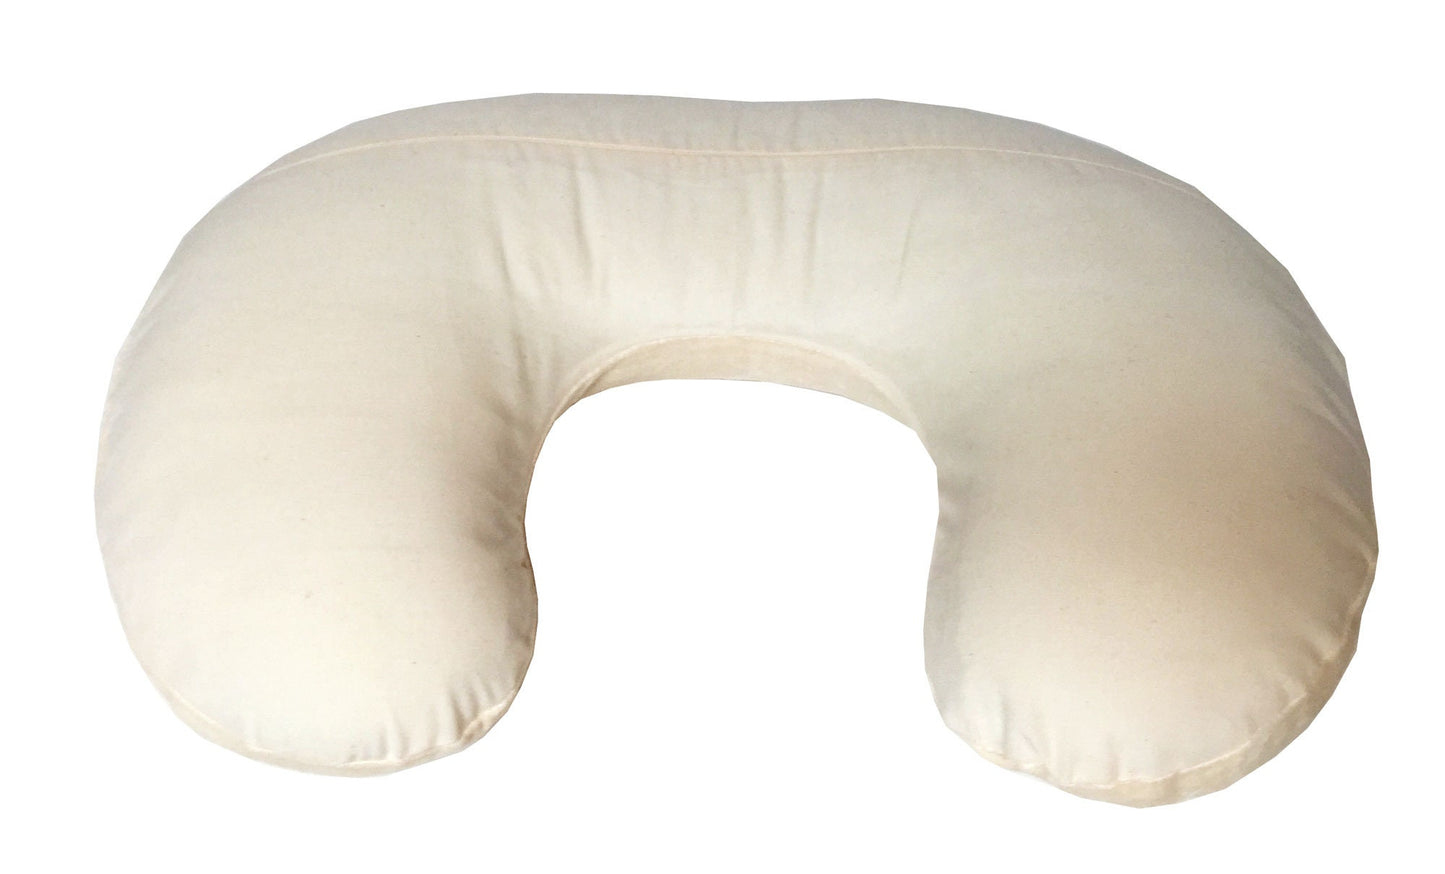 Boppy Style Nursing Pillow Cover - Choose Fabric and Color